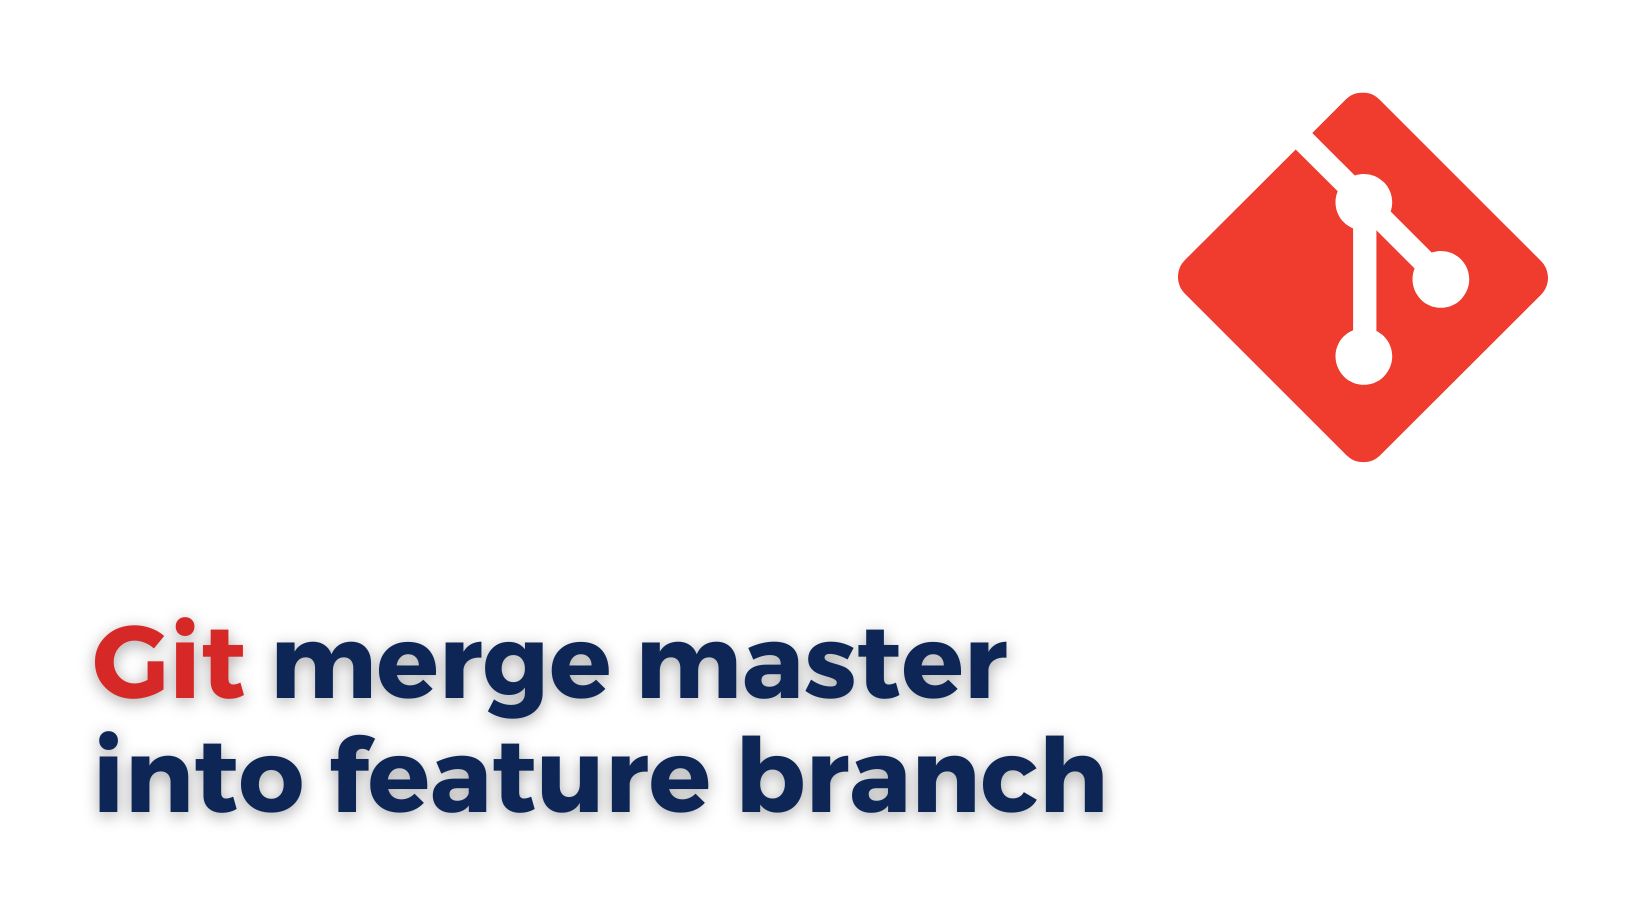 Git merge master into feature branch